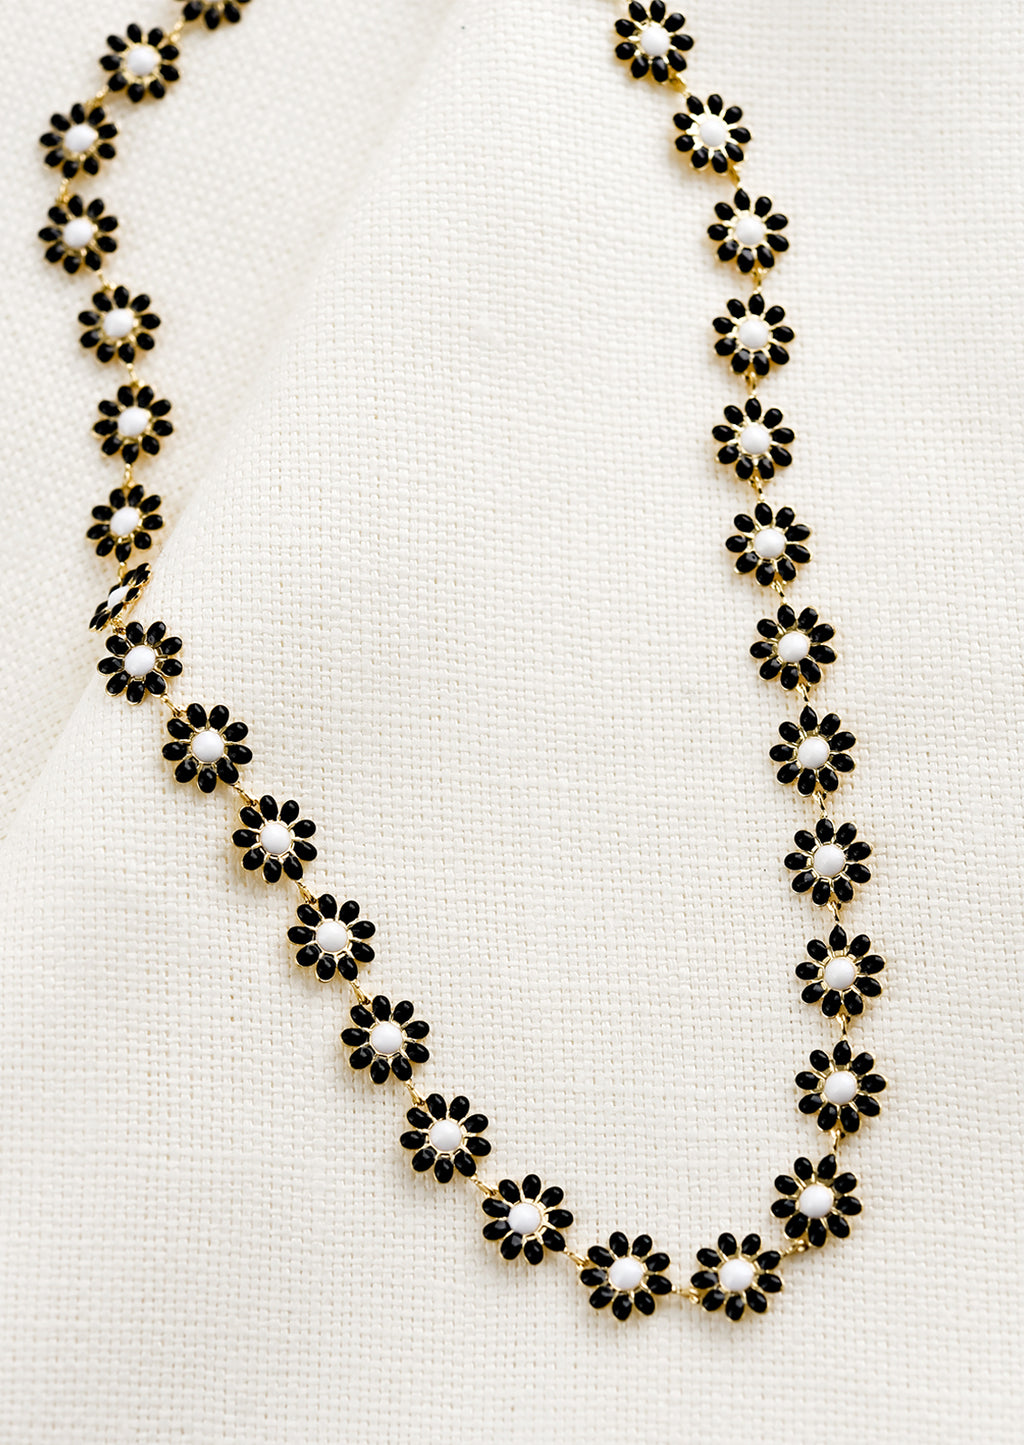 Black: A necklace with allover black and white enamel flowers.